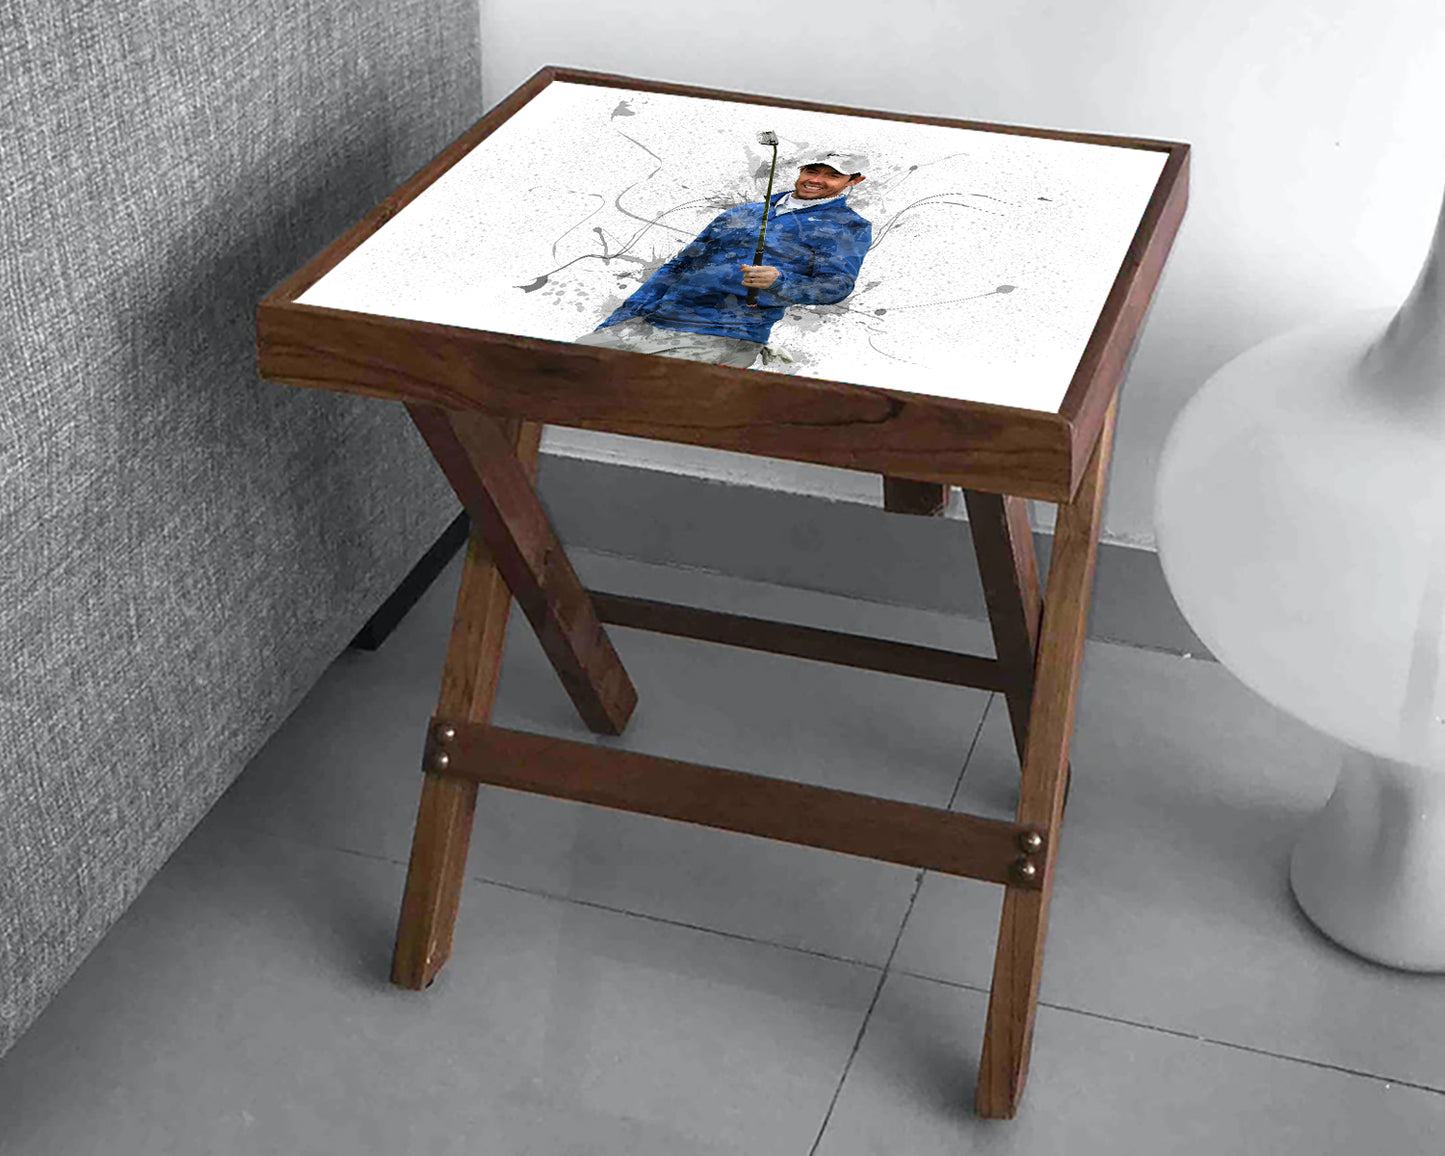 Rory Mcilroy Splash Effect Coffee and Laptop Table 